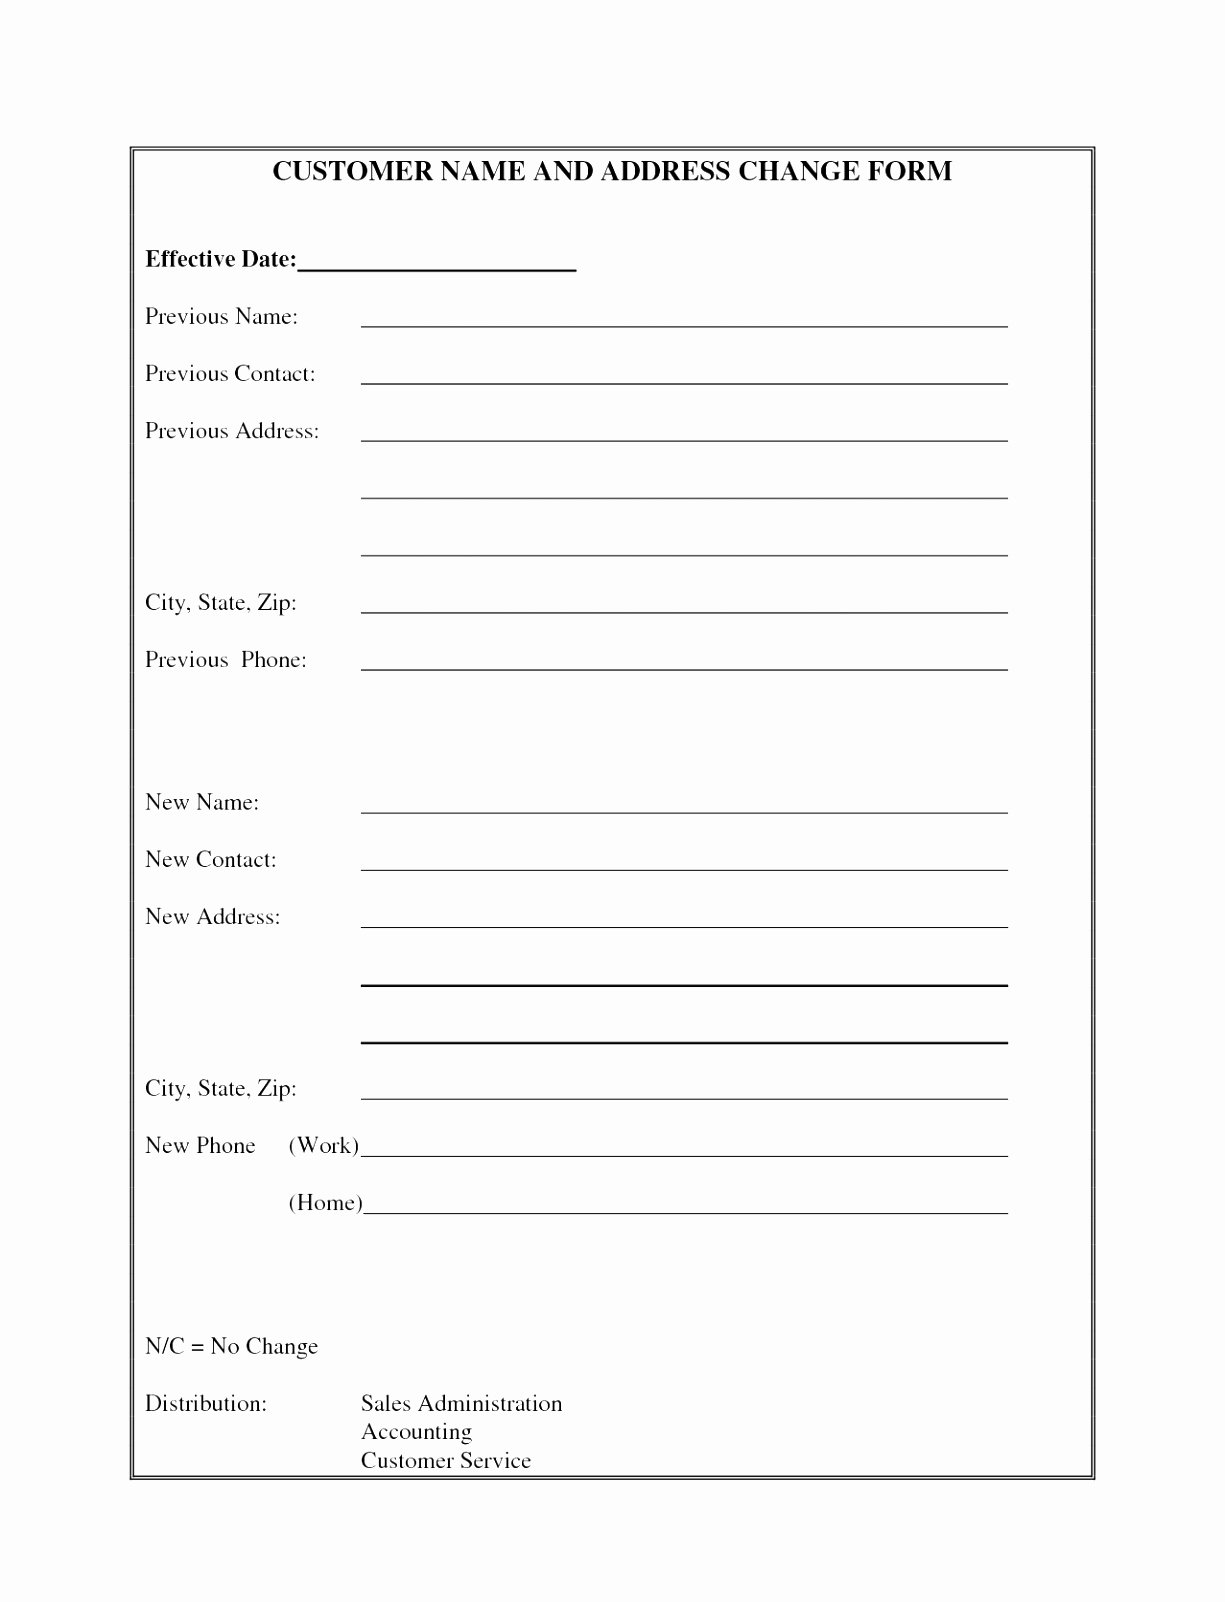 7 New Customer Application form Template Urtup